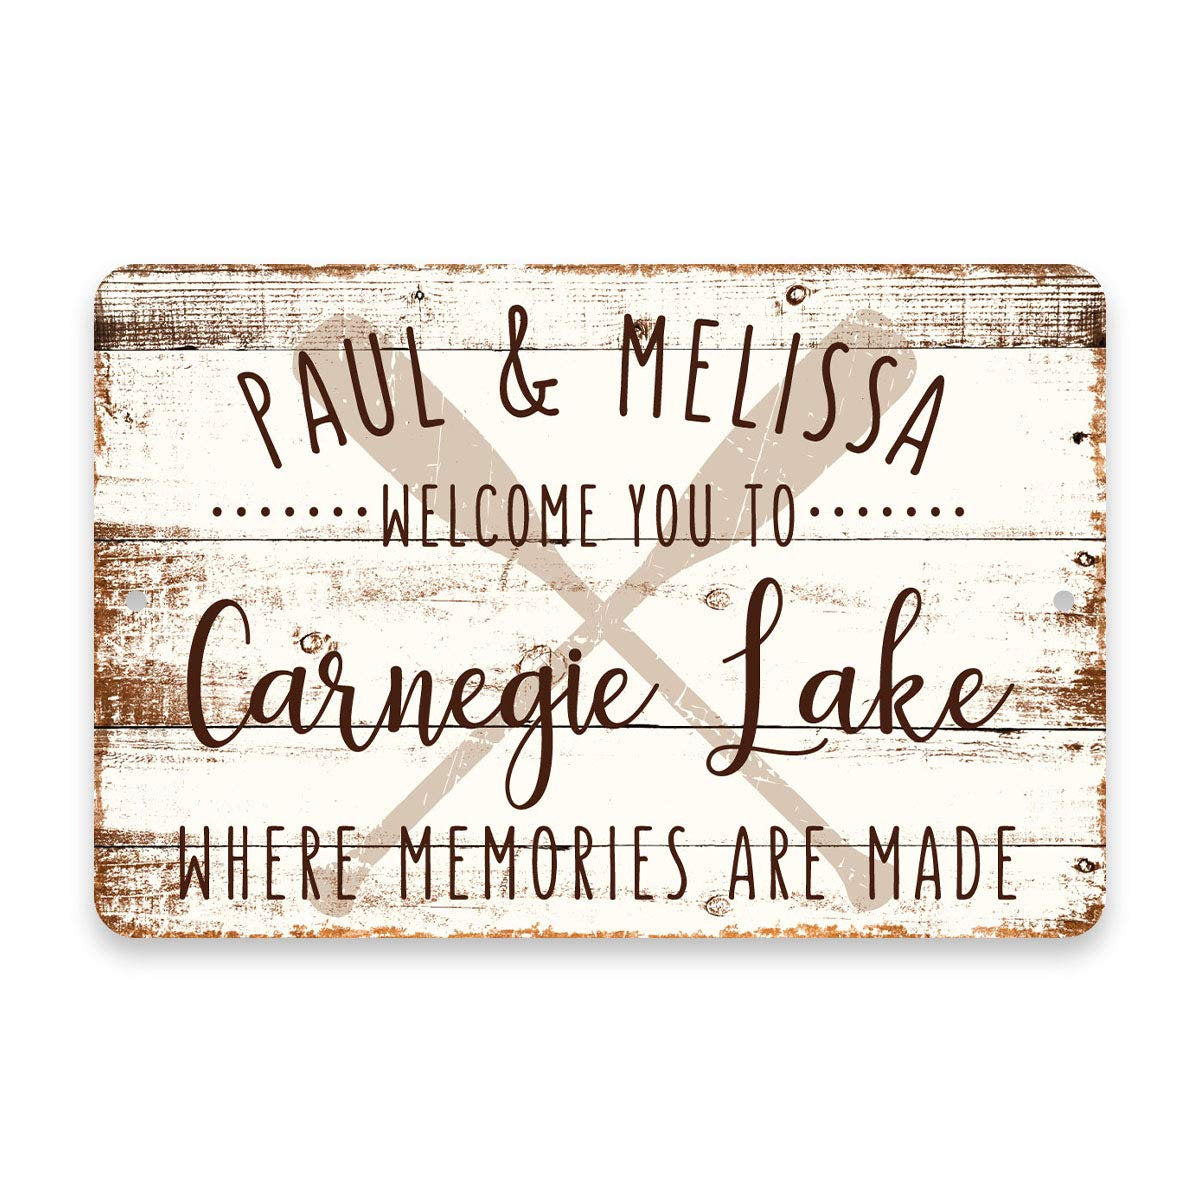 Personalized Welcome to Carnegie Lake Where Memories are Made Sign - 8 X 12 Metal Sign with Wood Look